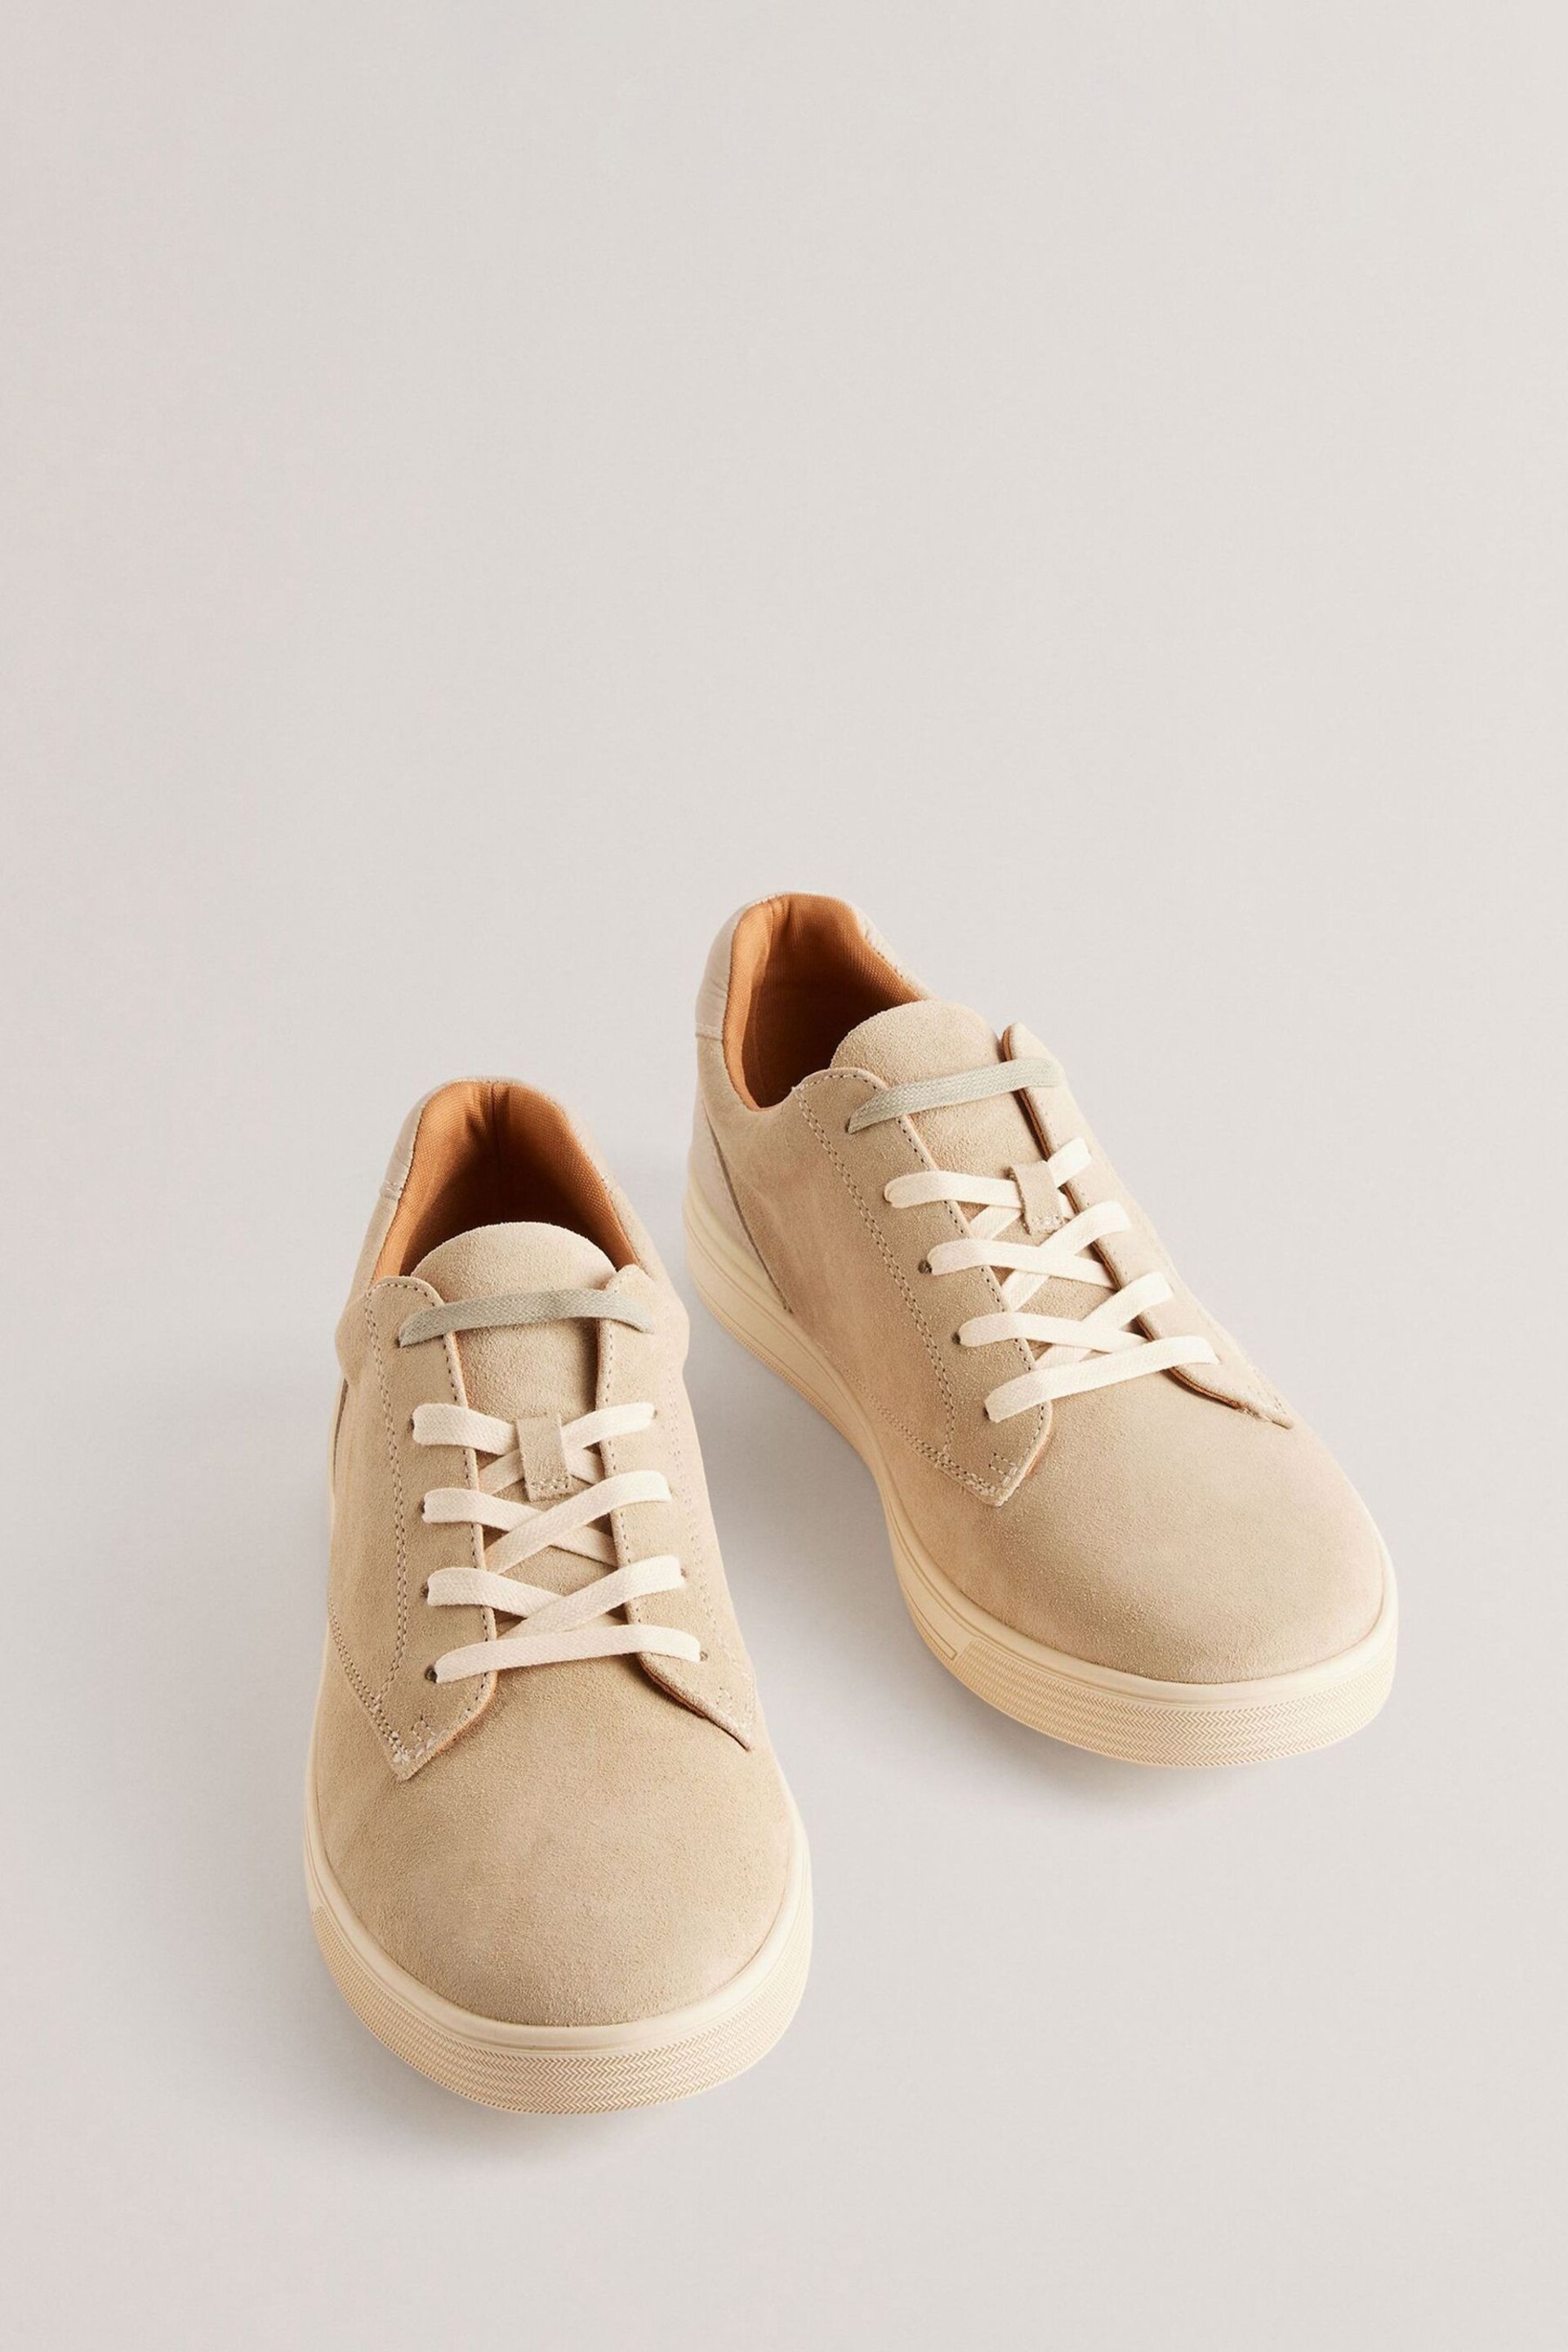 Ted Baker Natural Brentfd Leather Suede Cupsole Shoes - Image 2 of 5